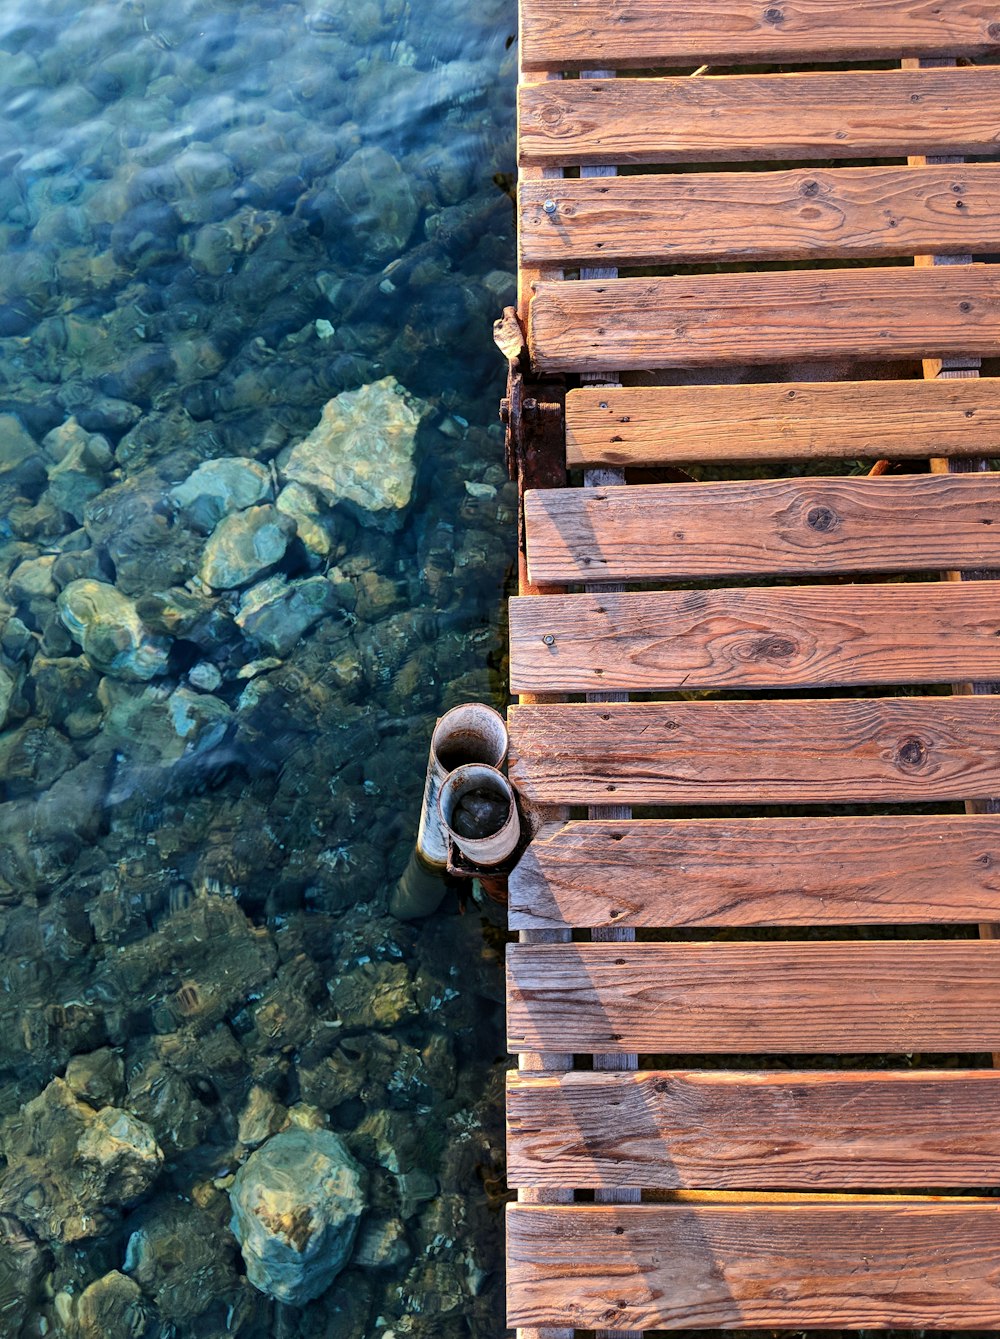 a pair of shoes that are sitting on a dock